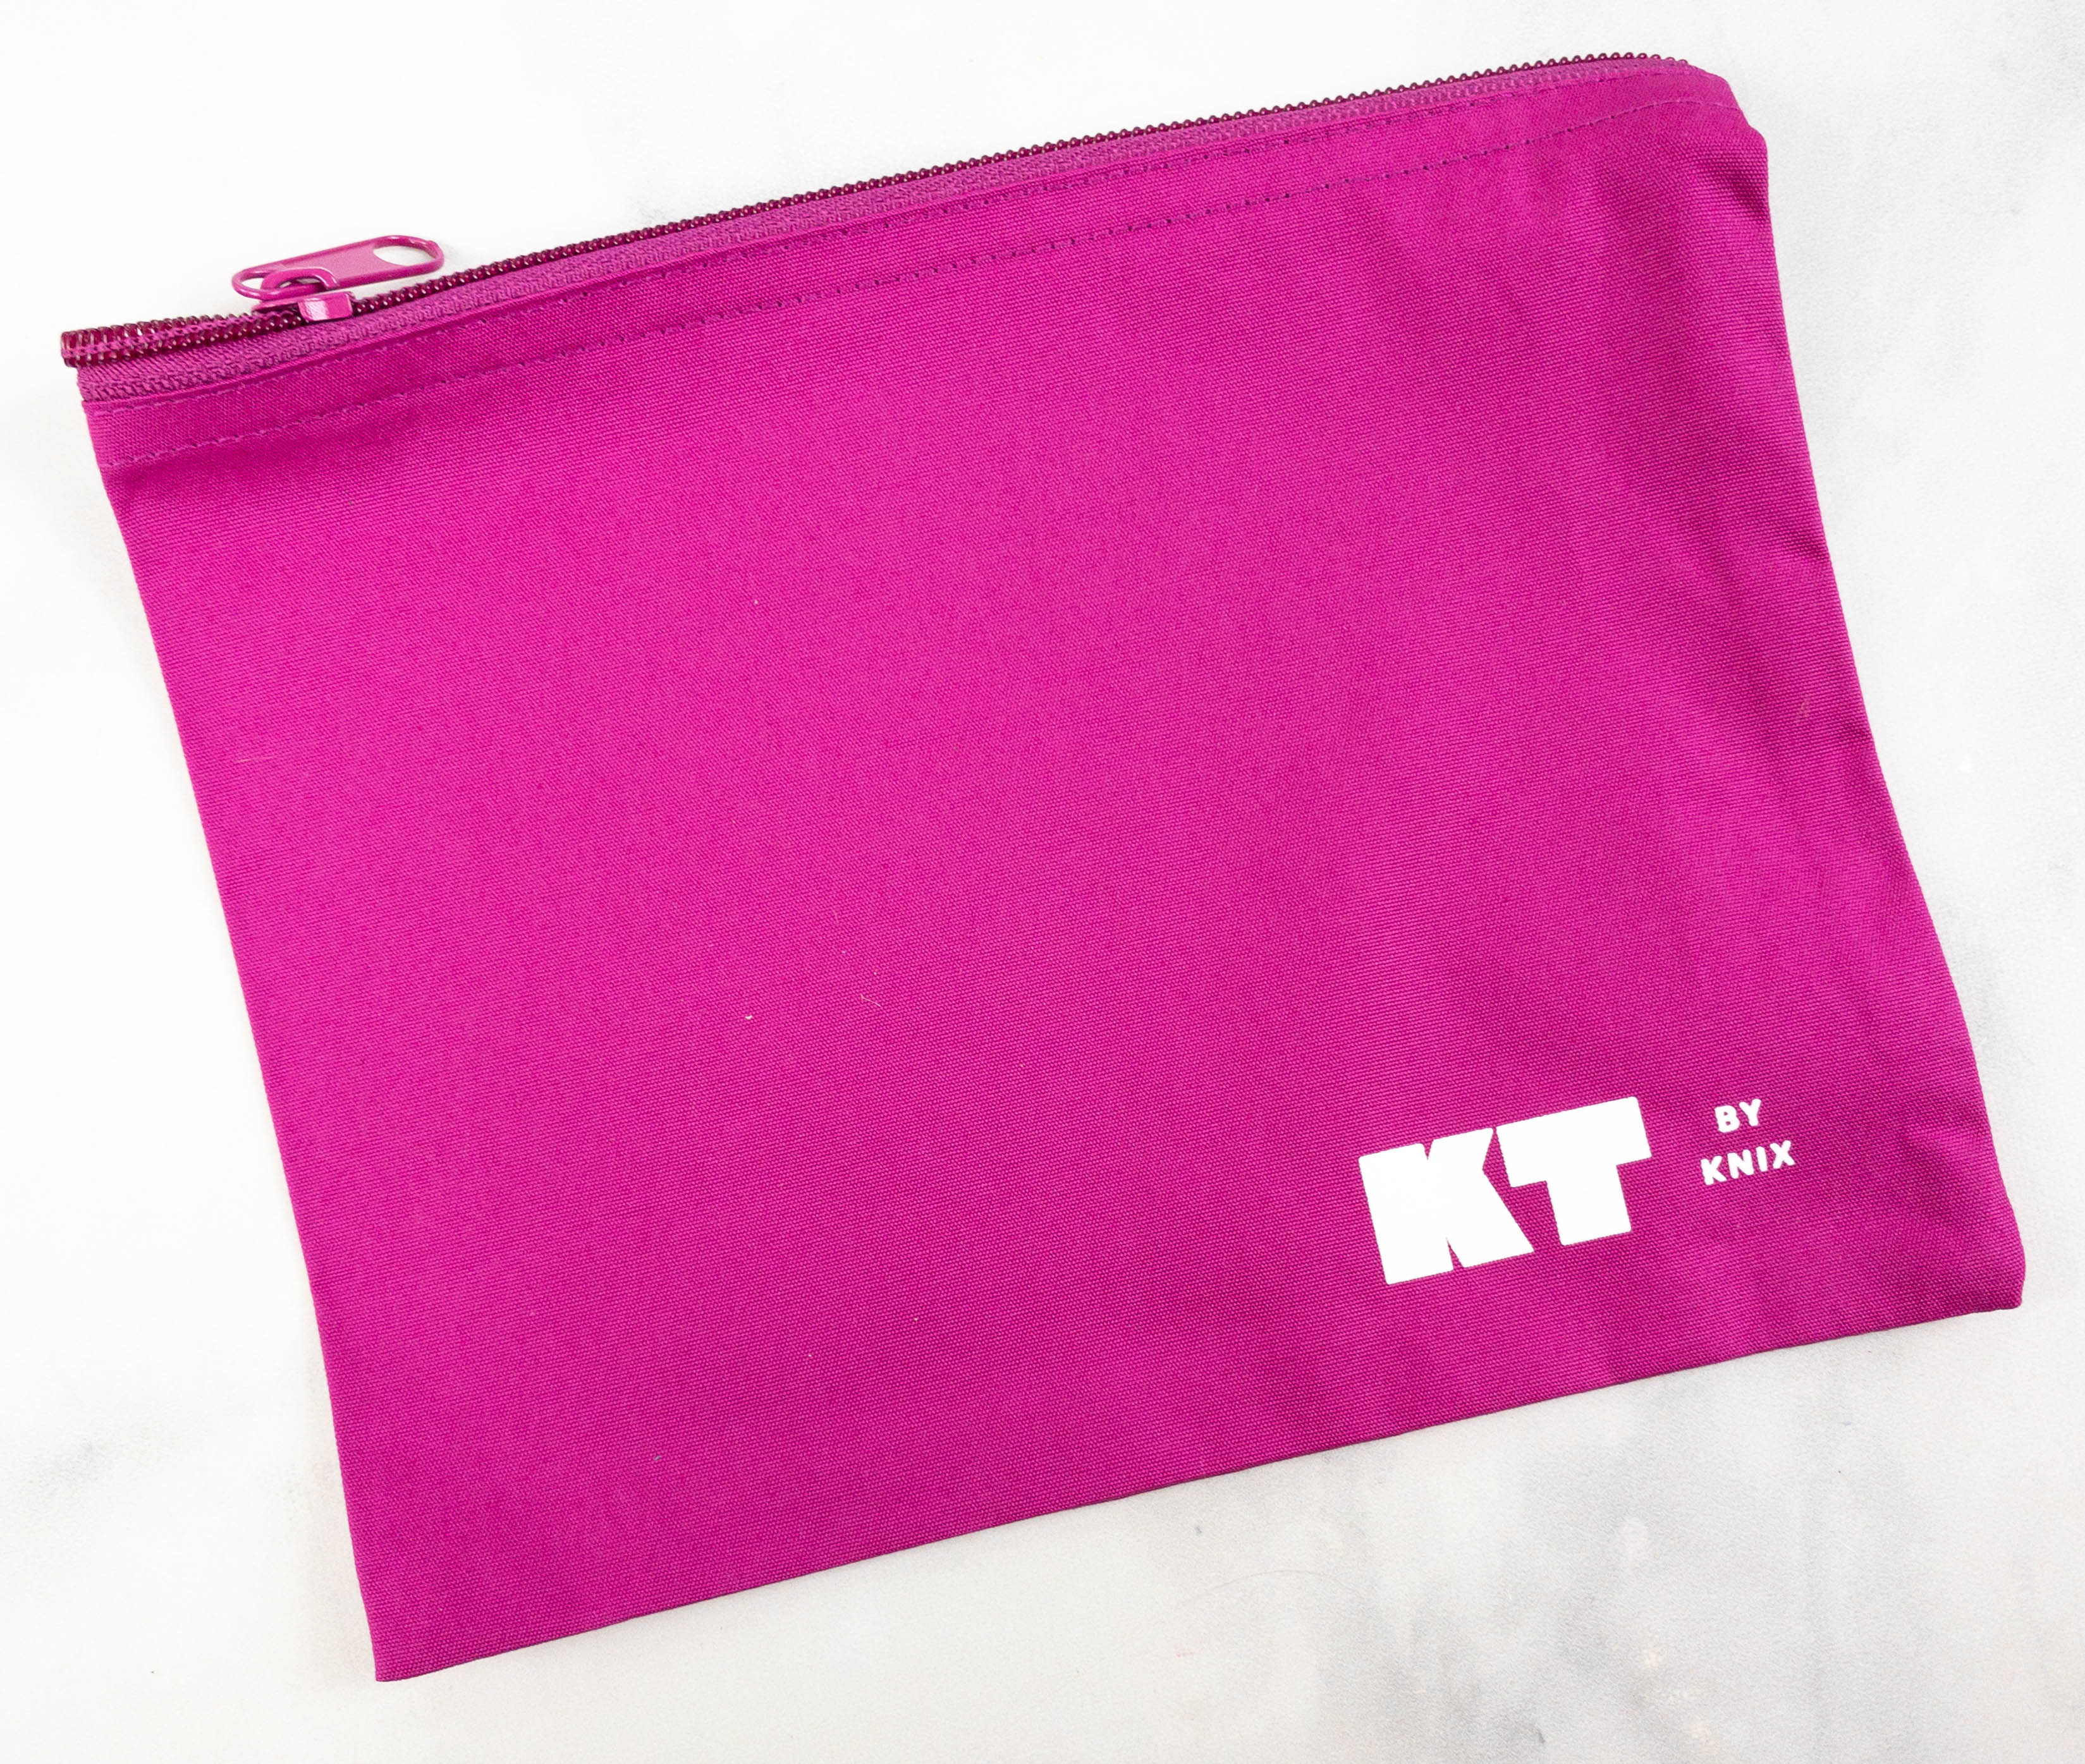 KT by Knix Reviews: Get All The Details At Hello Subscription!